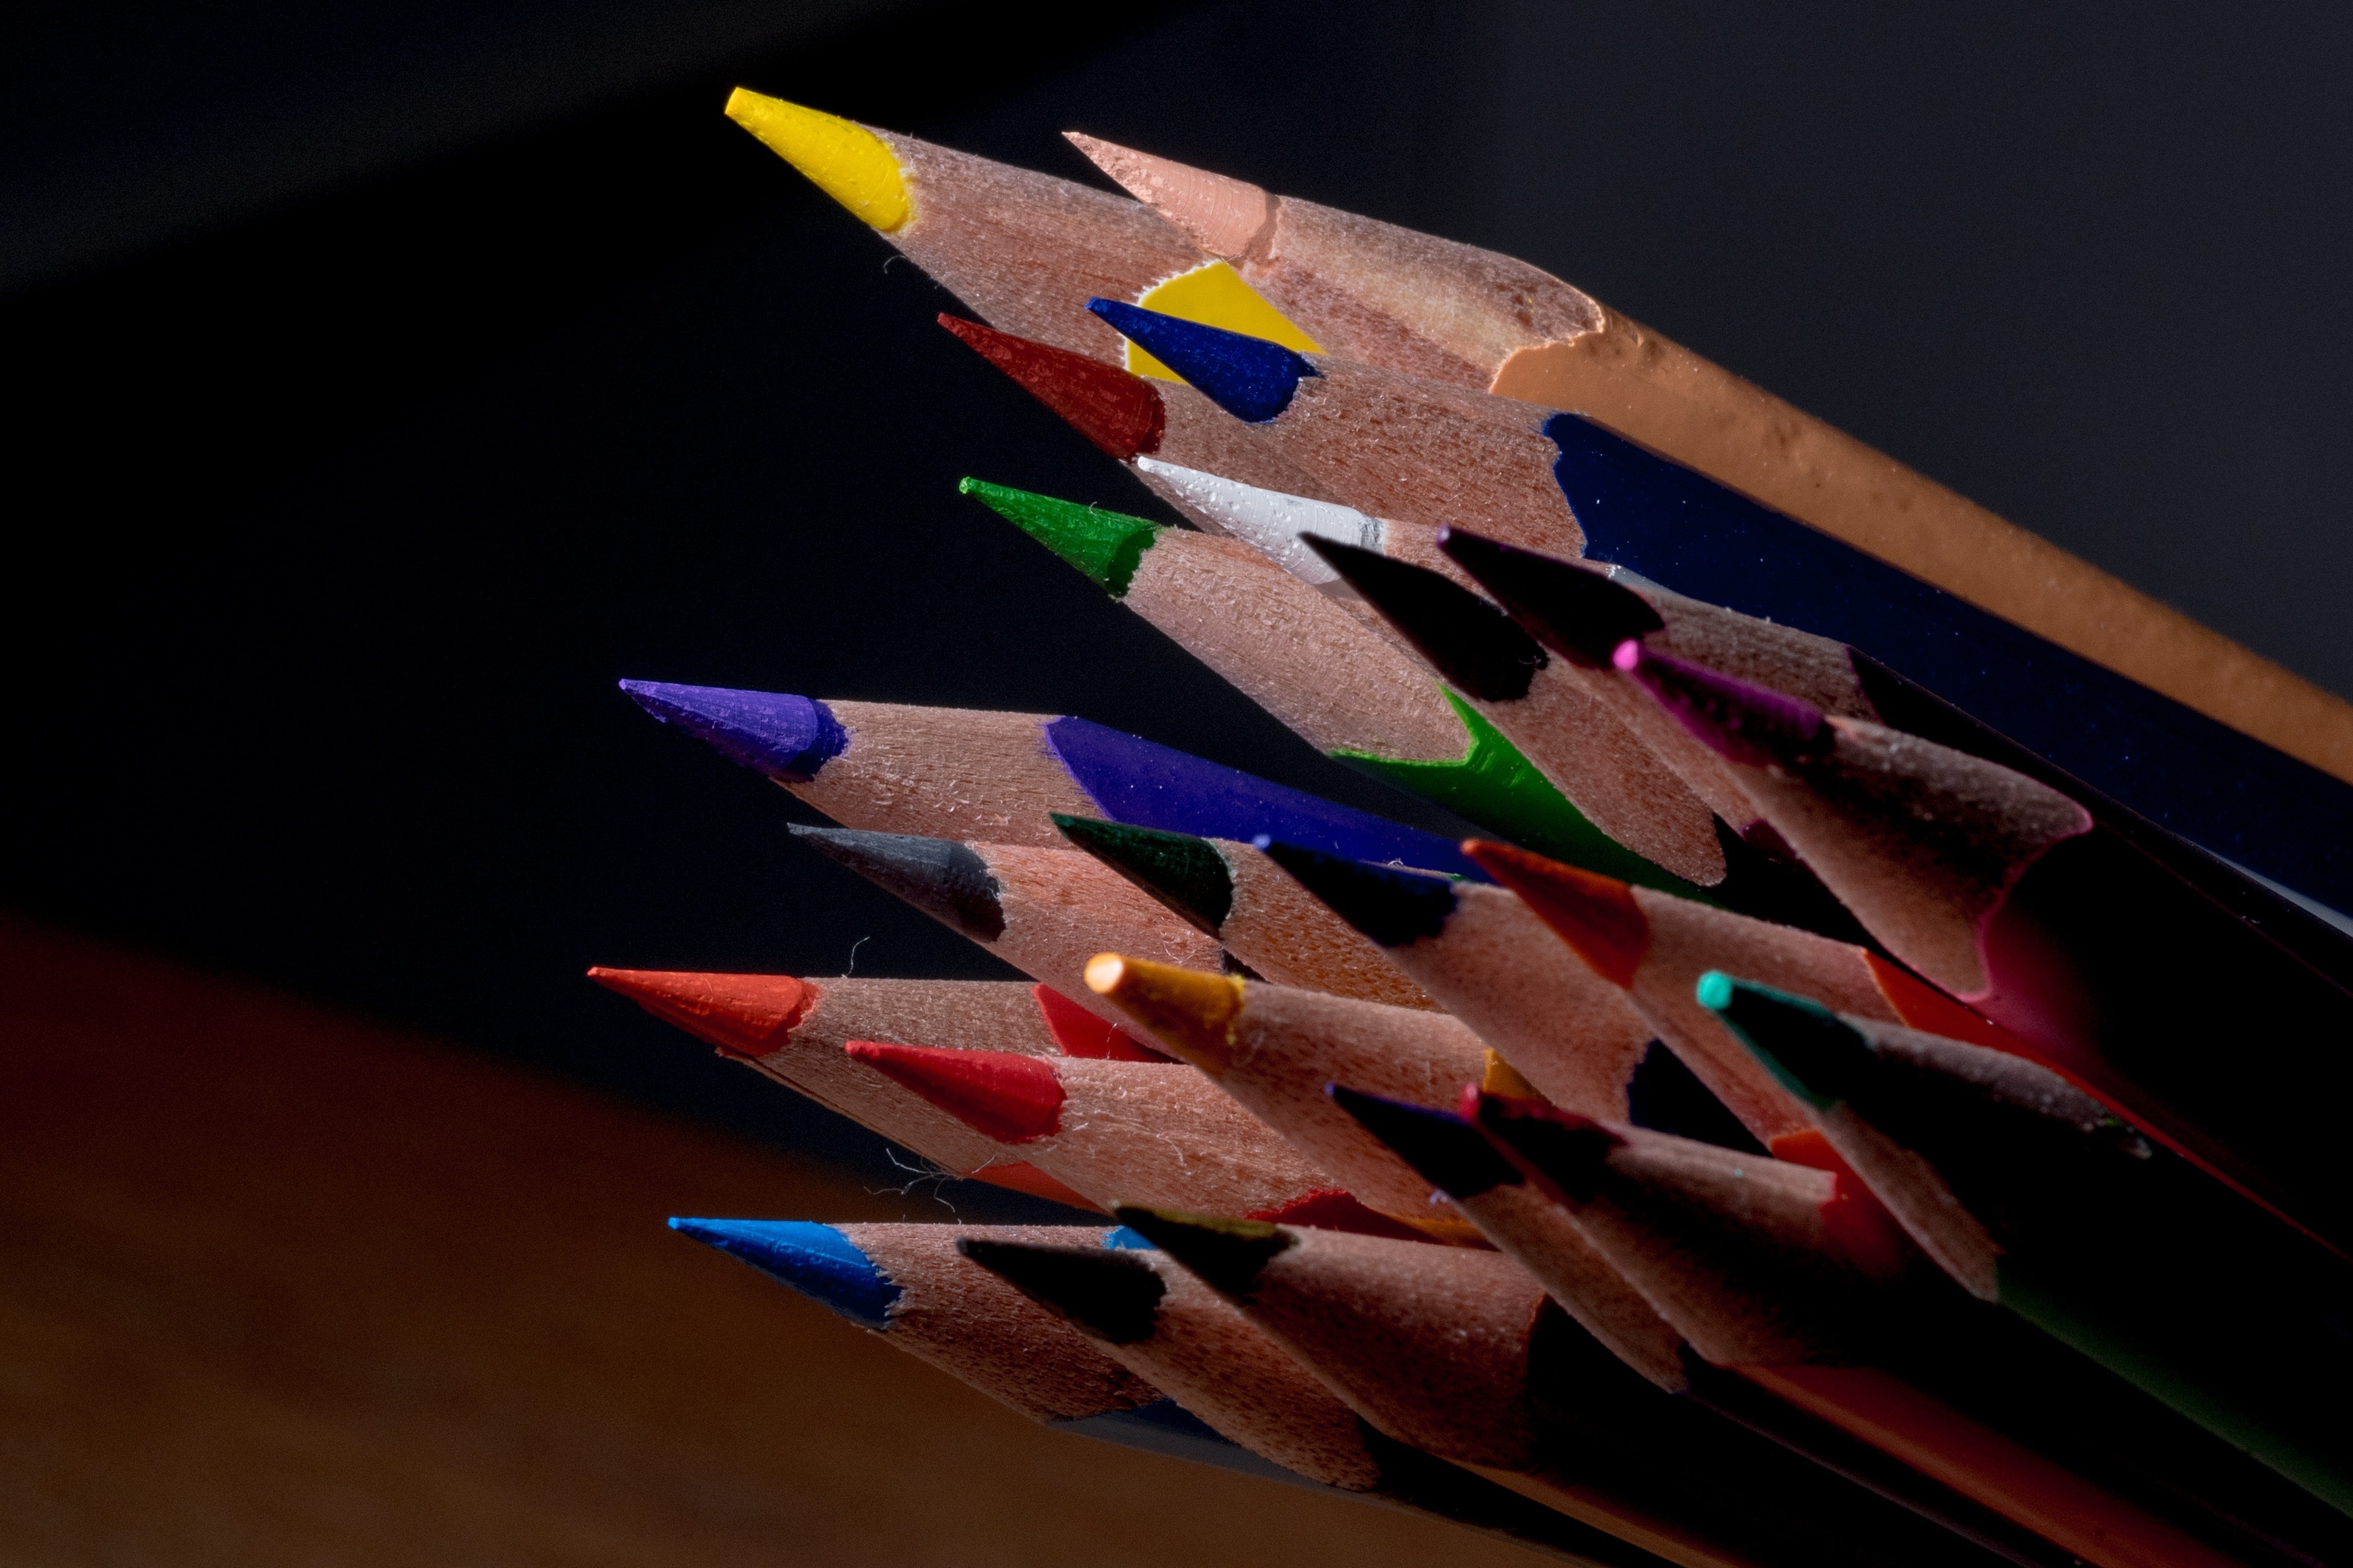 group of coloring pencils up close